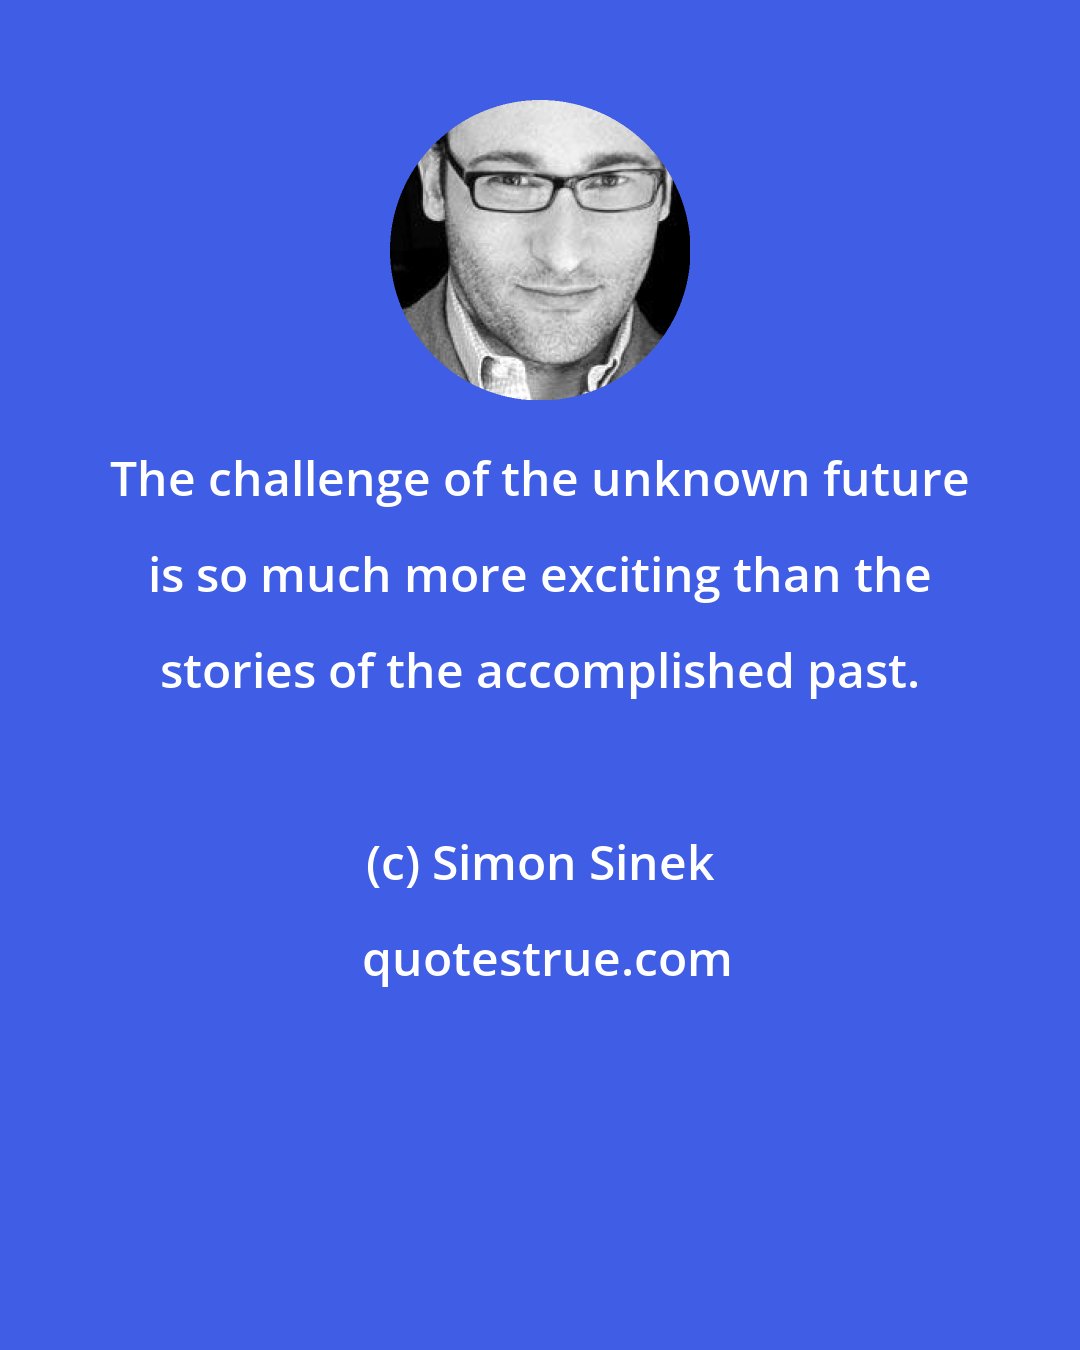 Simon Sinek: The challenge of the unknown future is so much more exciting than the stories of the accomplished past.